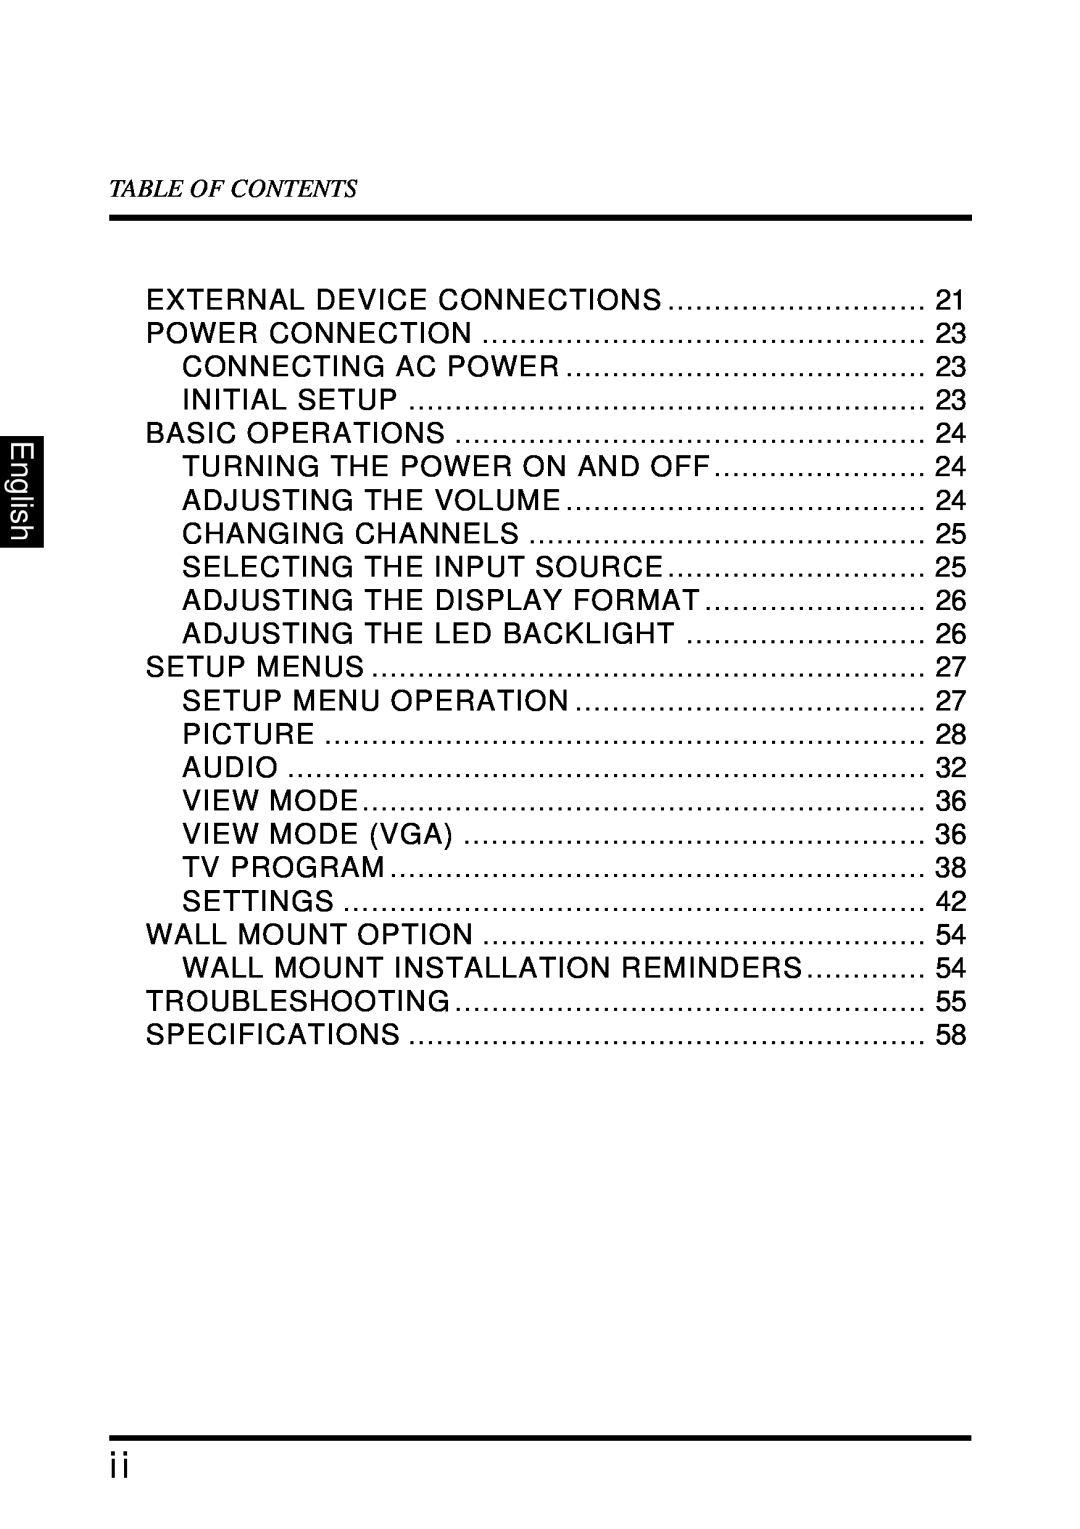 Westinghouse LD-4680 user manual English, External Device Connections 